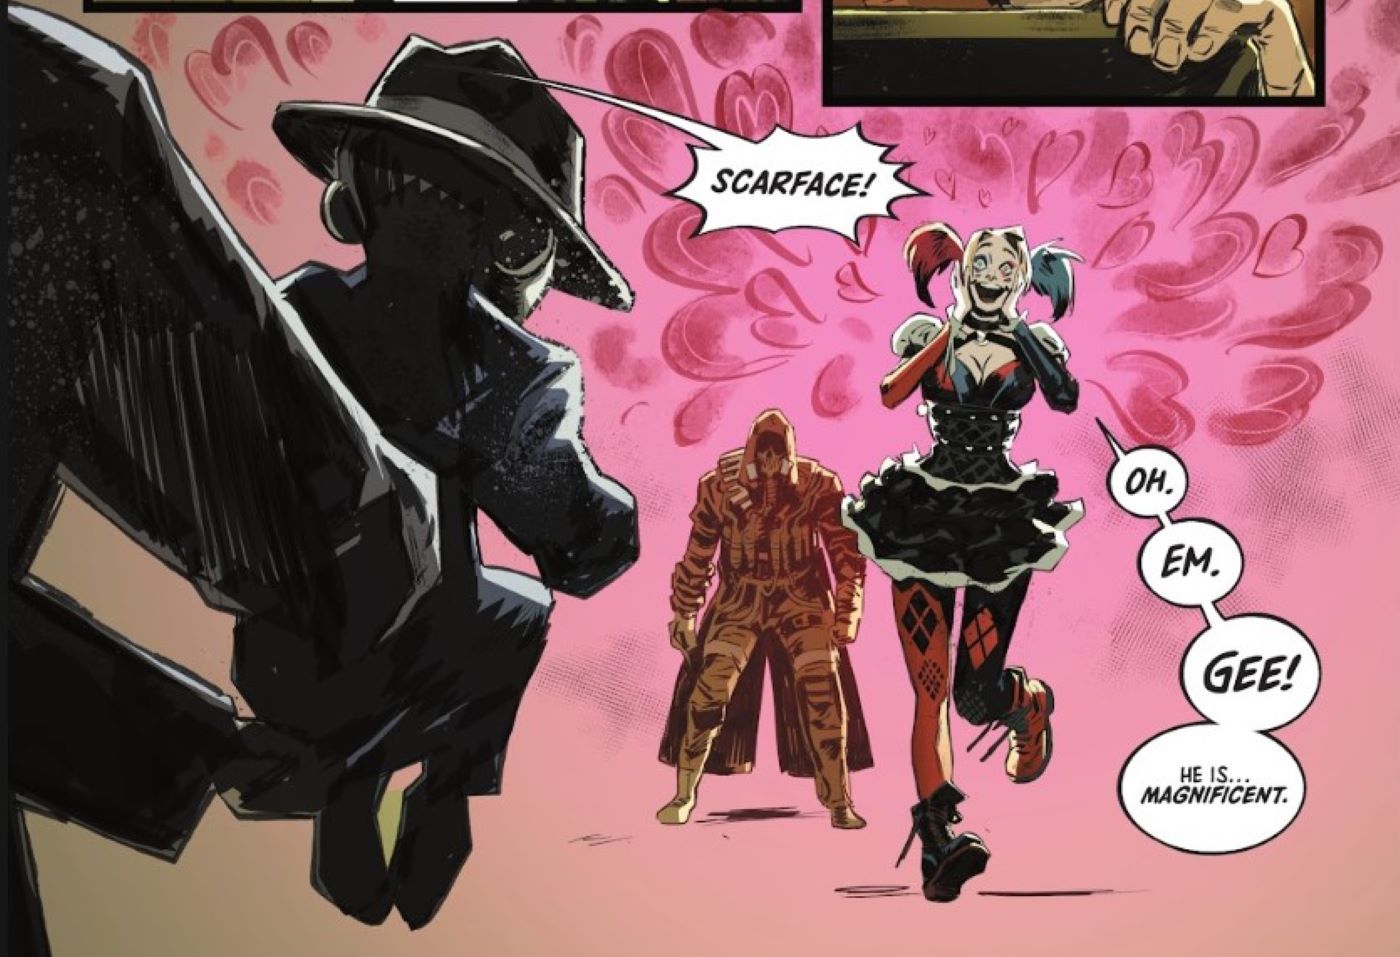 Sorry Poison Ivy: Harley Quinn Catches Feelings for a Shocking Gotham Rogue